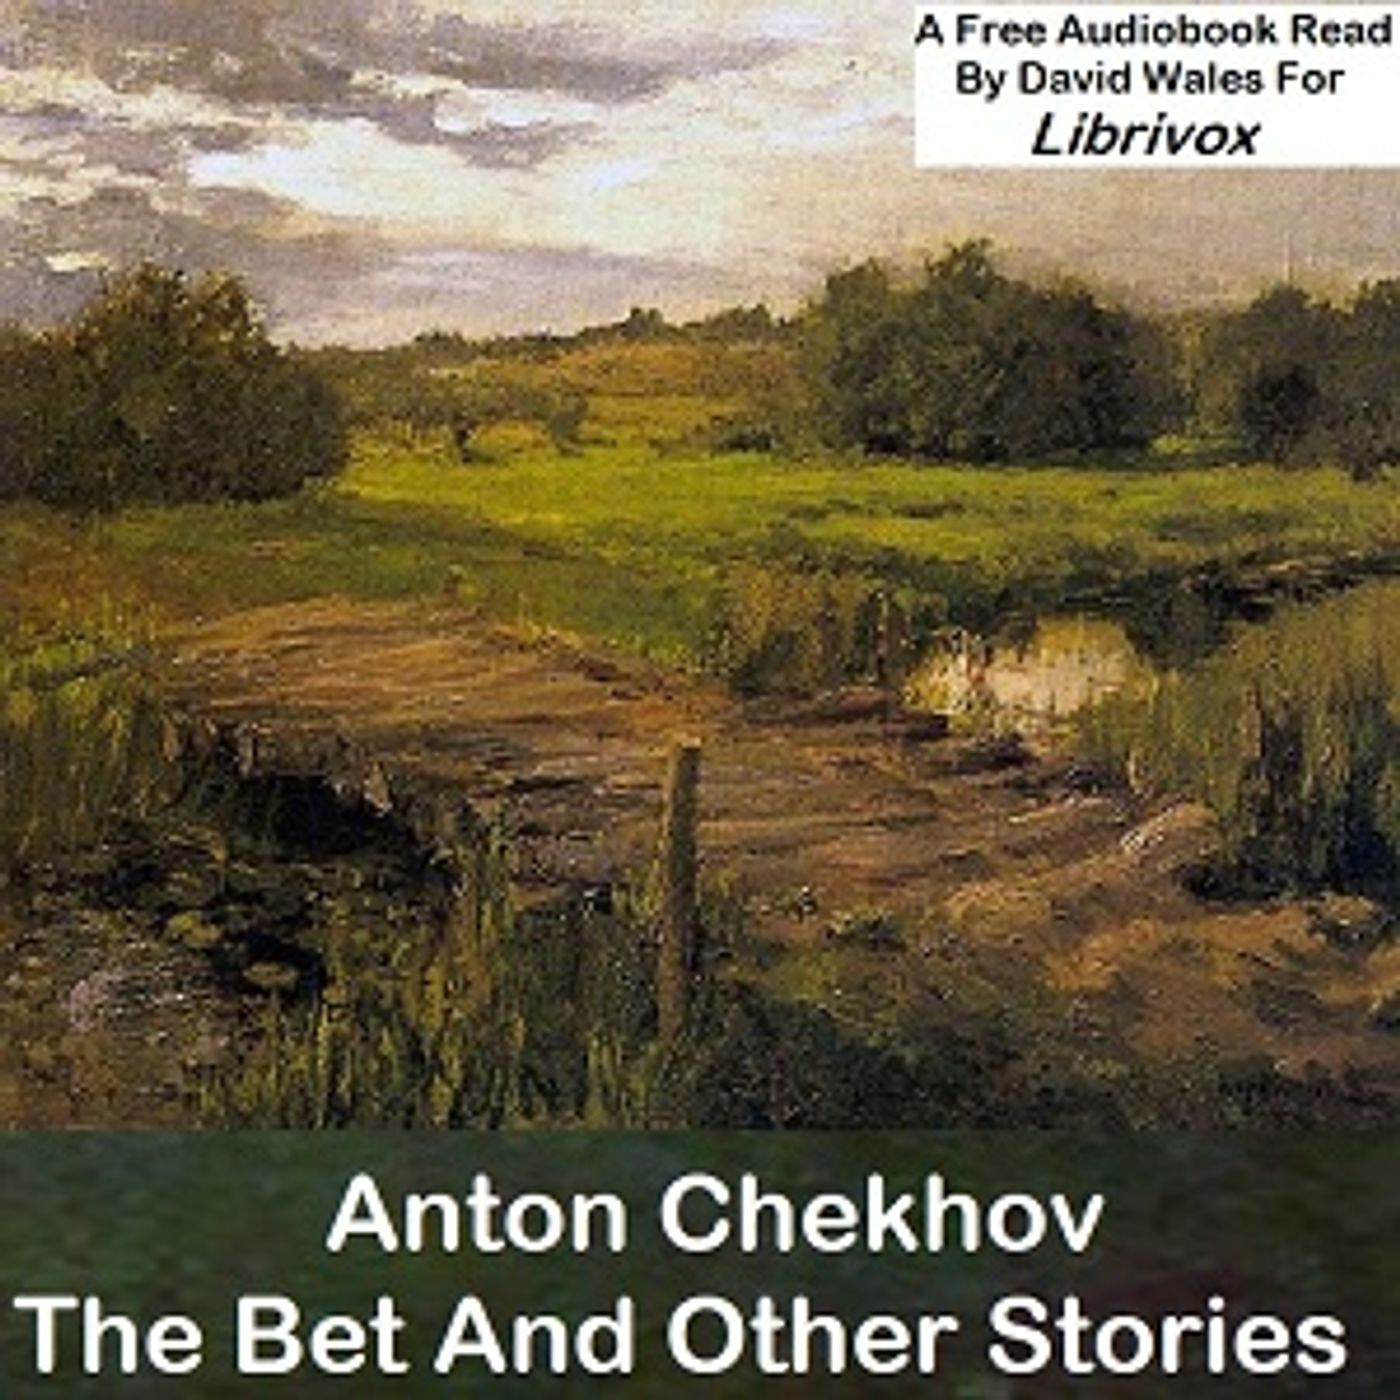 Bet and Other Stories, The by Anton Chekhov (1860 – 1904)